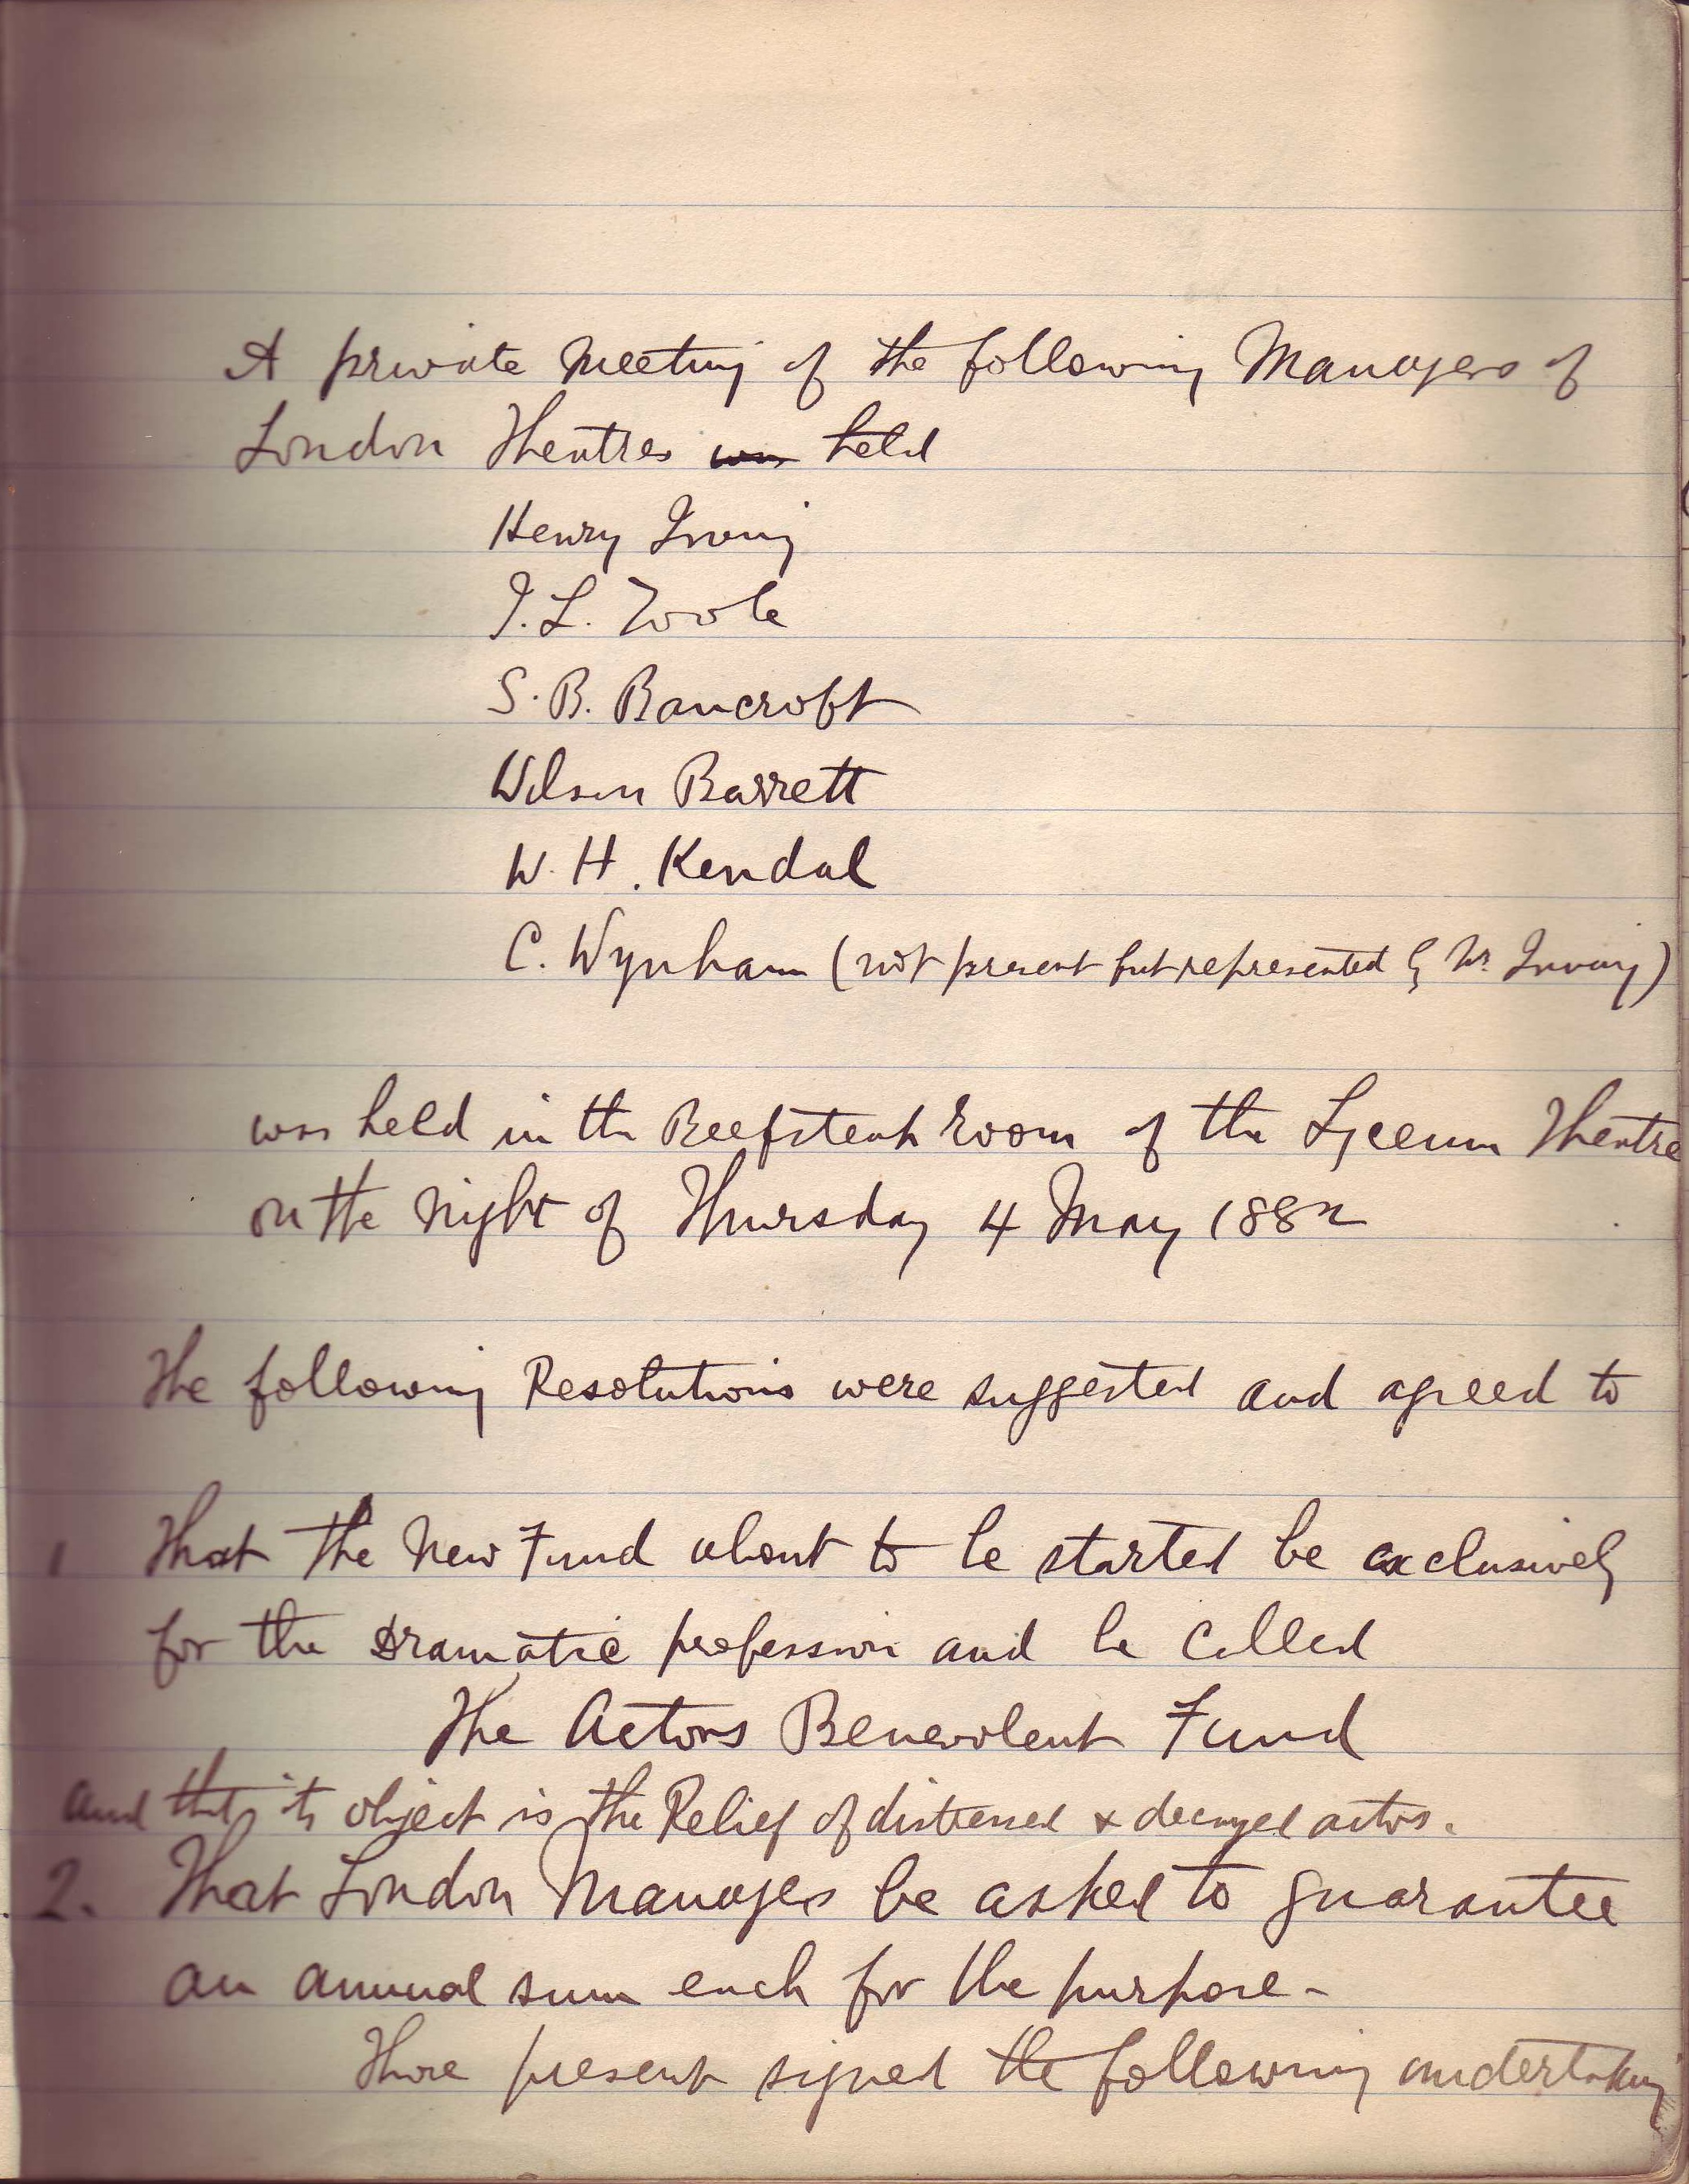 Minutes of the first meeting of the Actors' Benevolent Fund, 4th May 1882